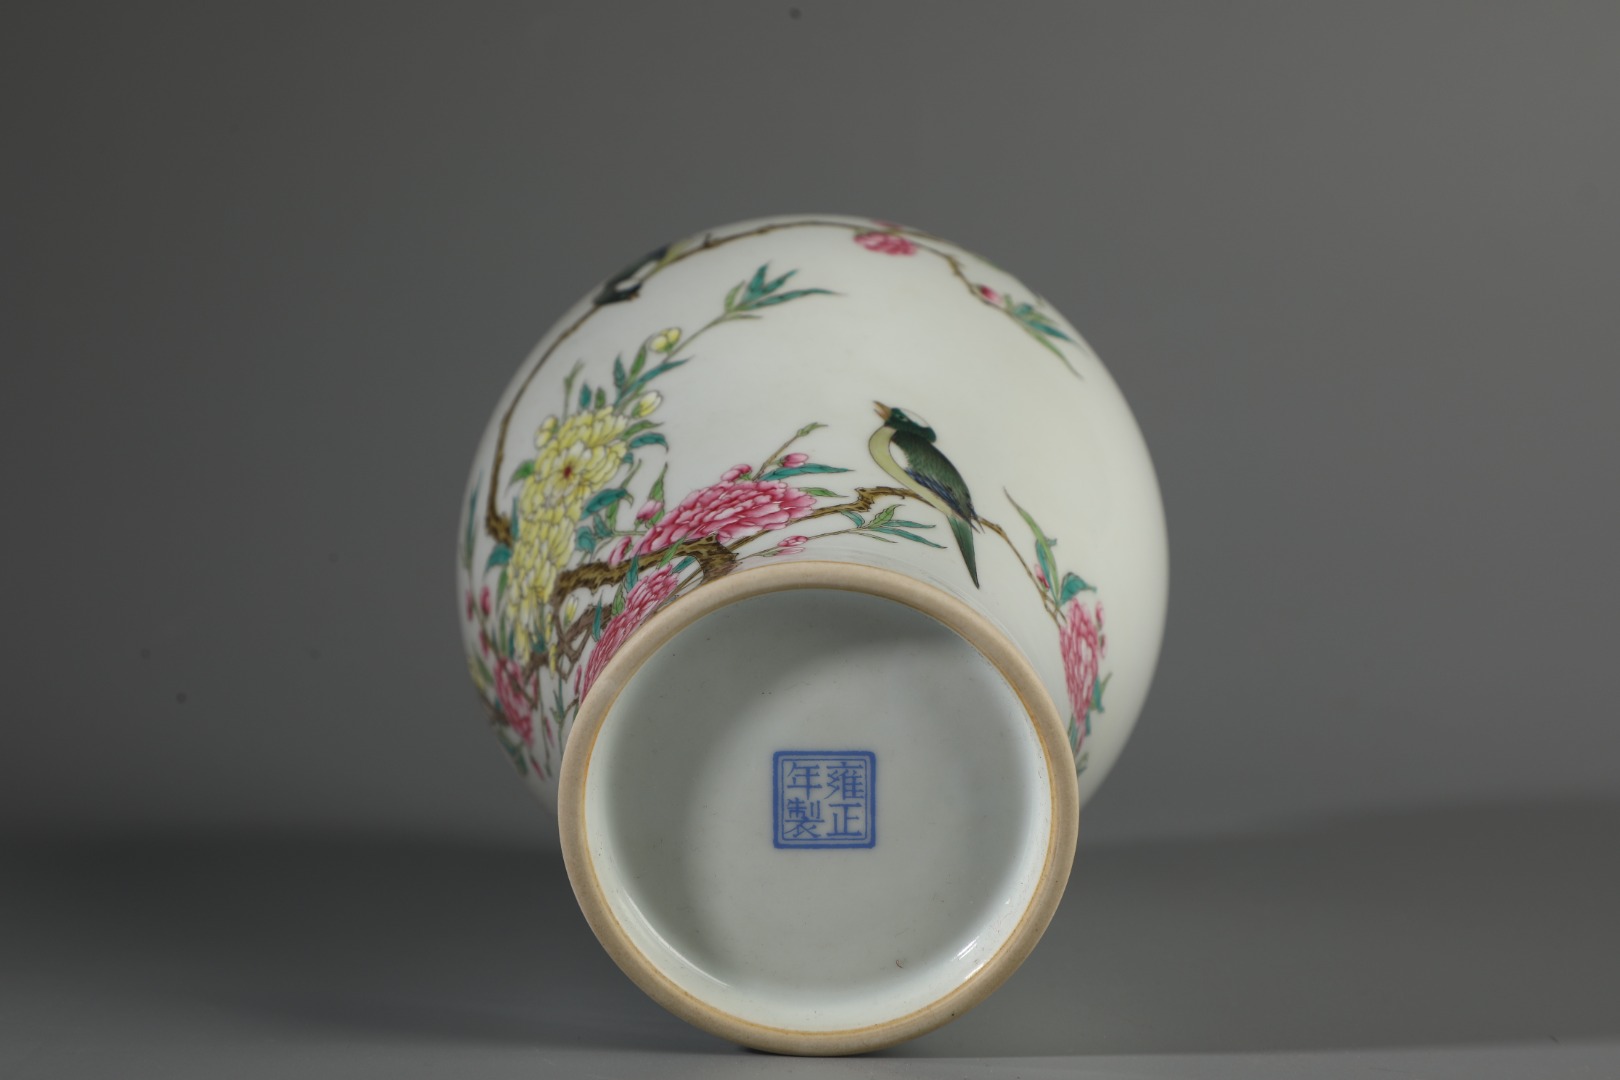 Famille rose plum vase made during the Yongzheng period of the Qing Dynasty - Image 9 of 9